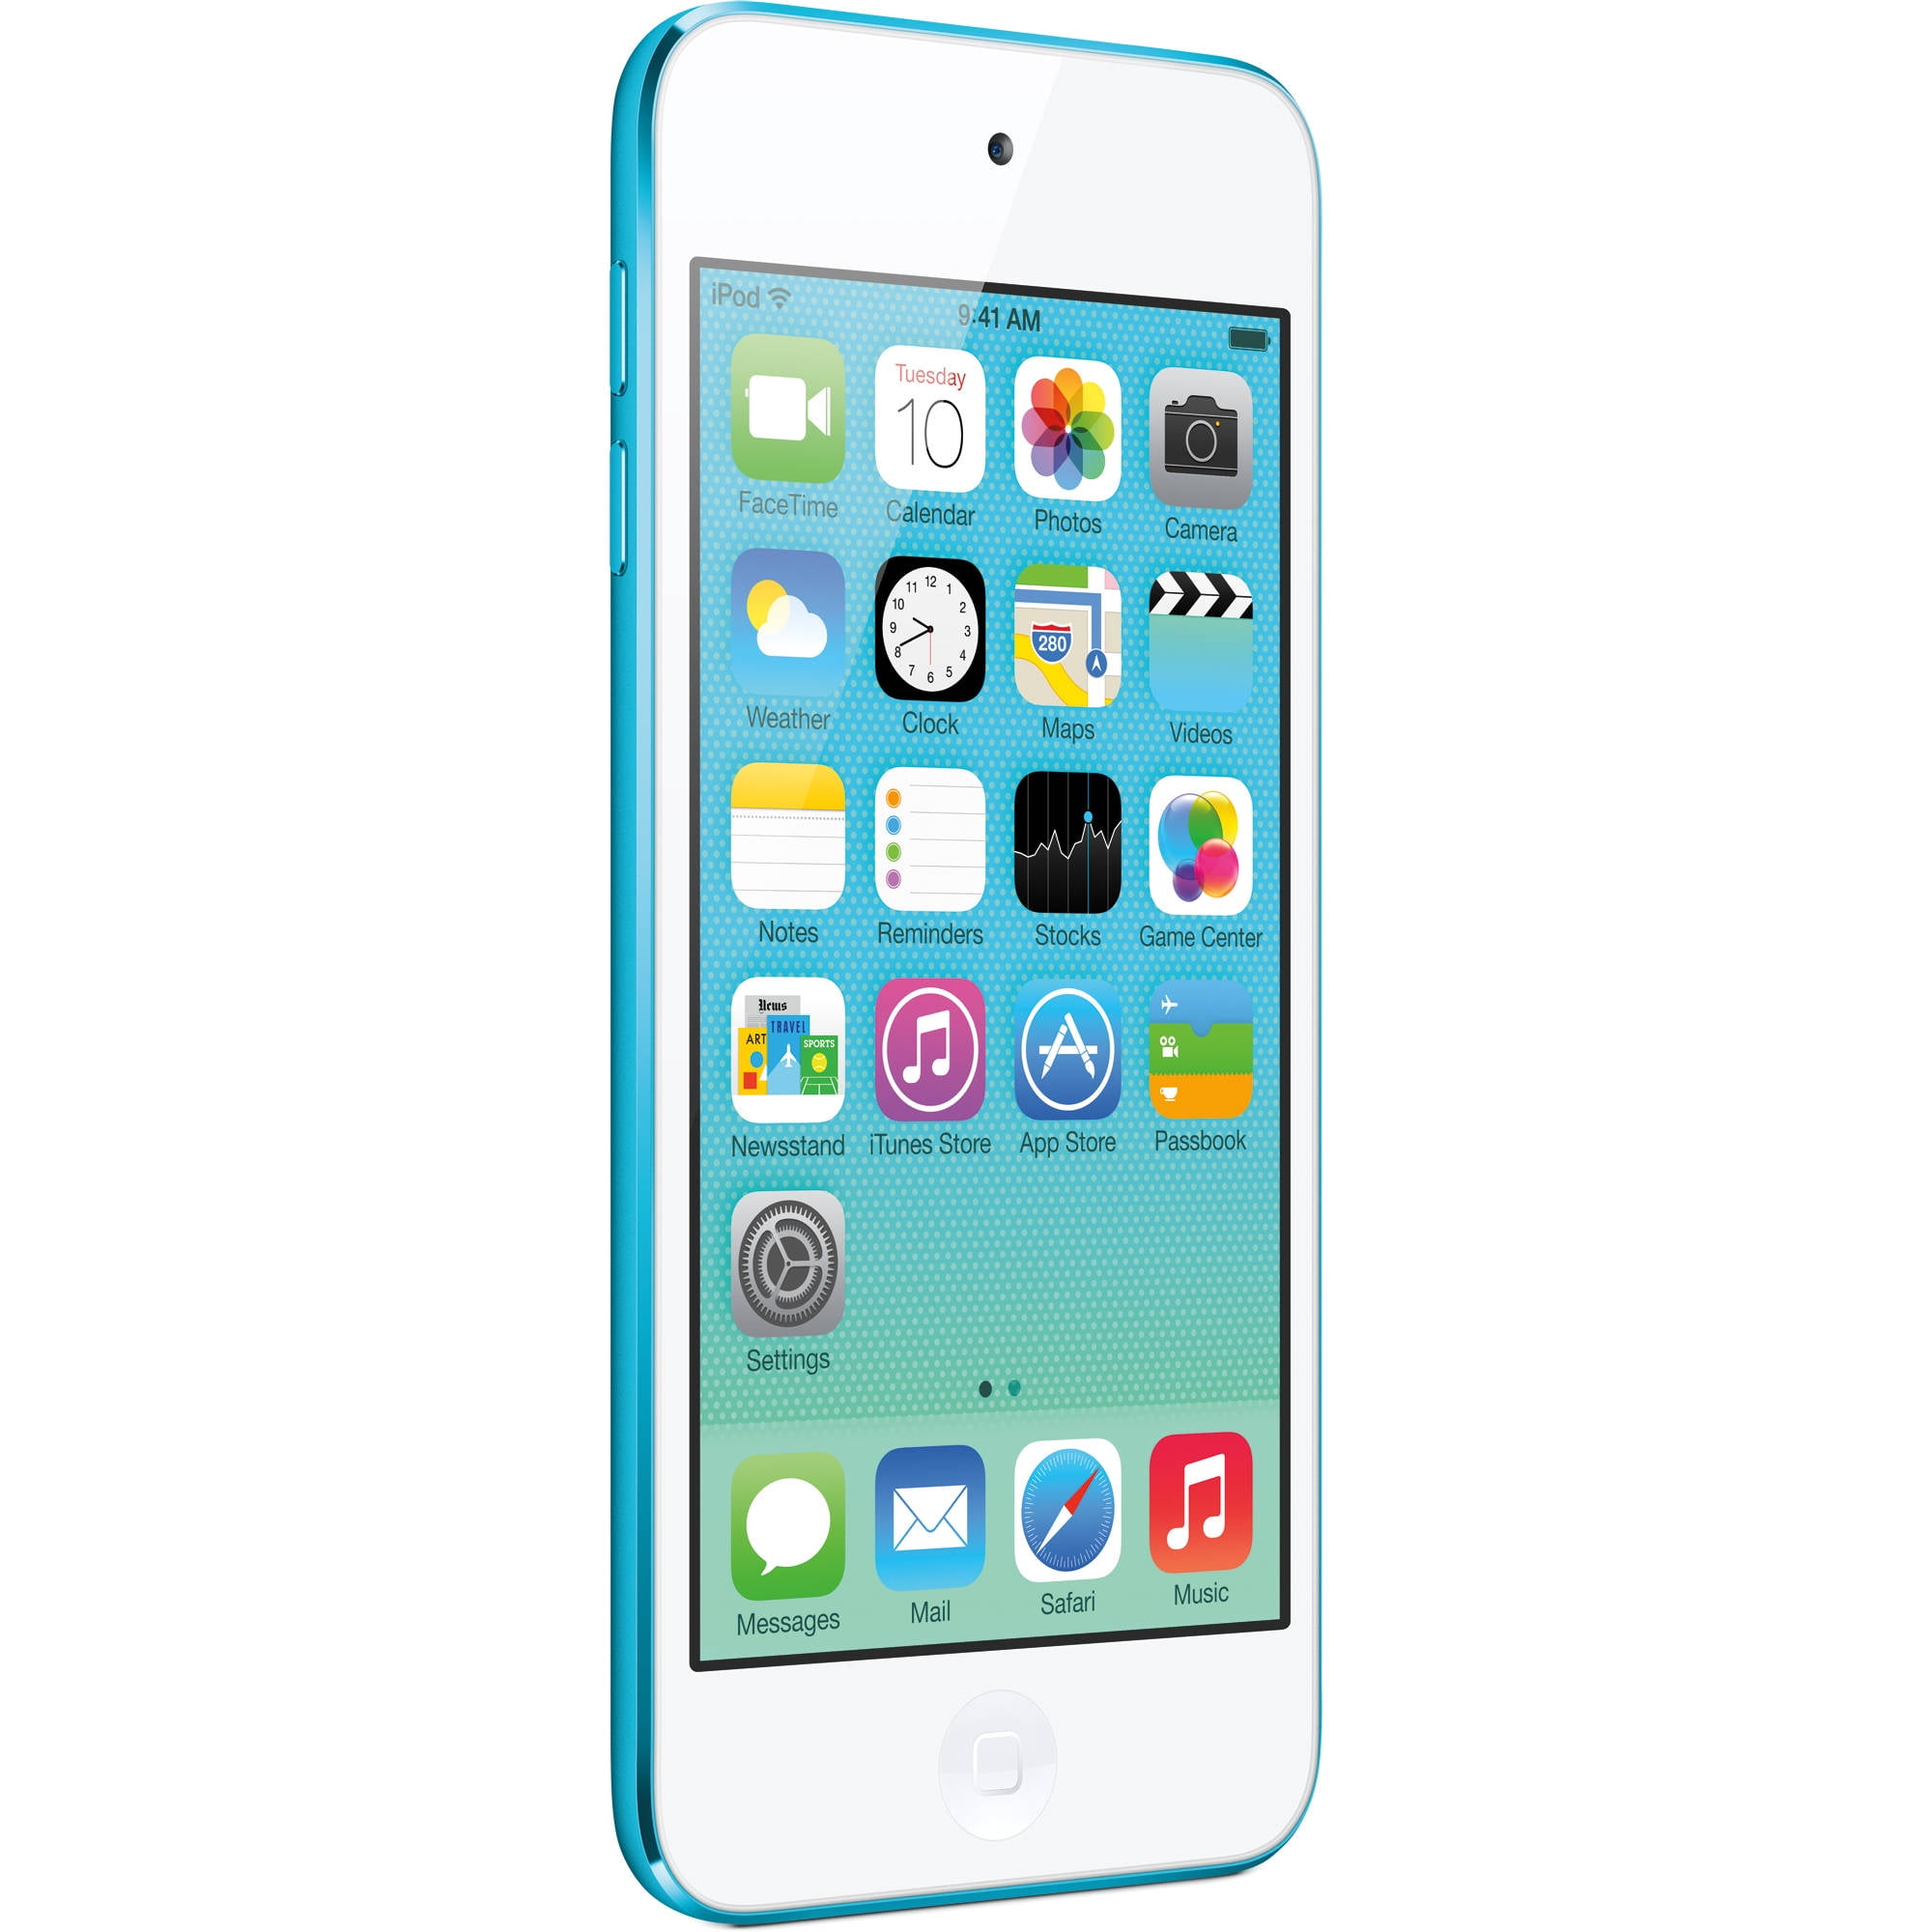 Drastisch Charlotte Bronte Beyond Used Apple iPod Touch 5th Generation 64GB Blue MD718LL/A - Walmart.com